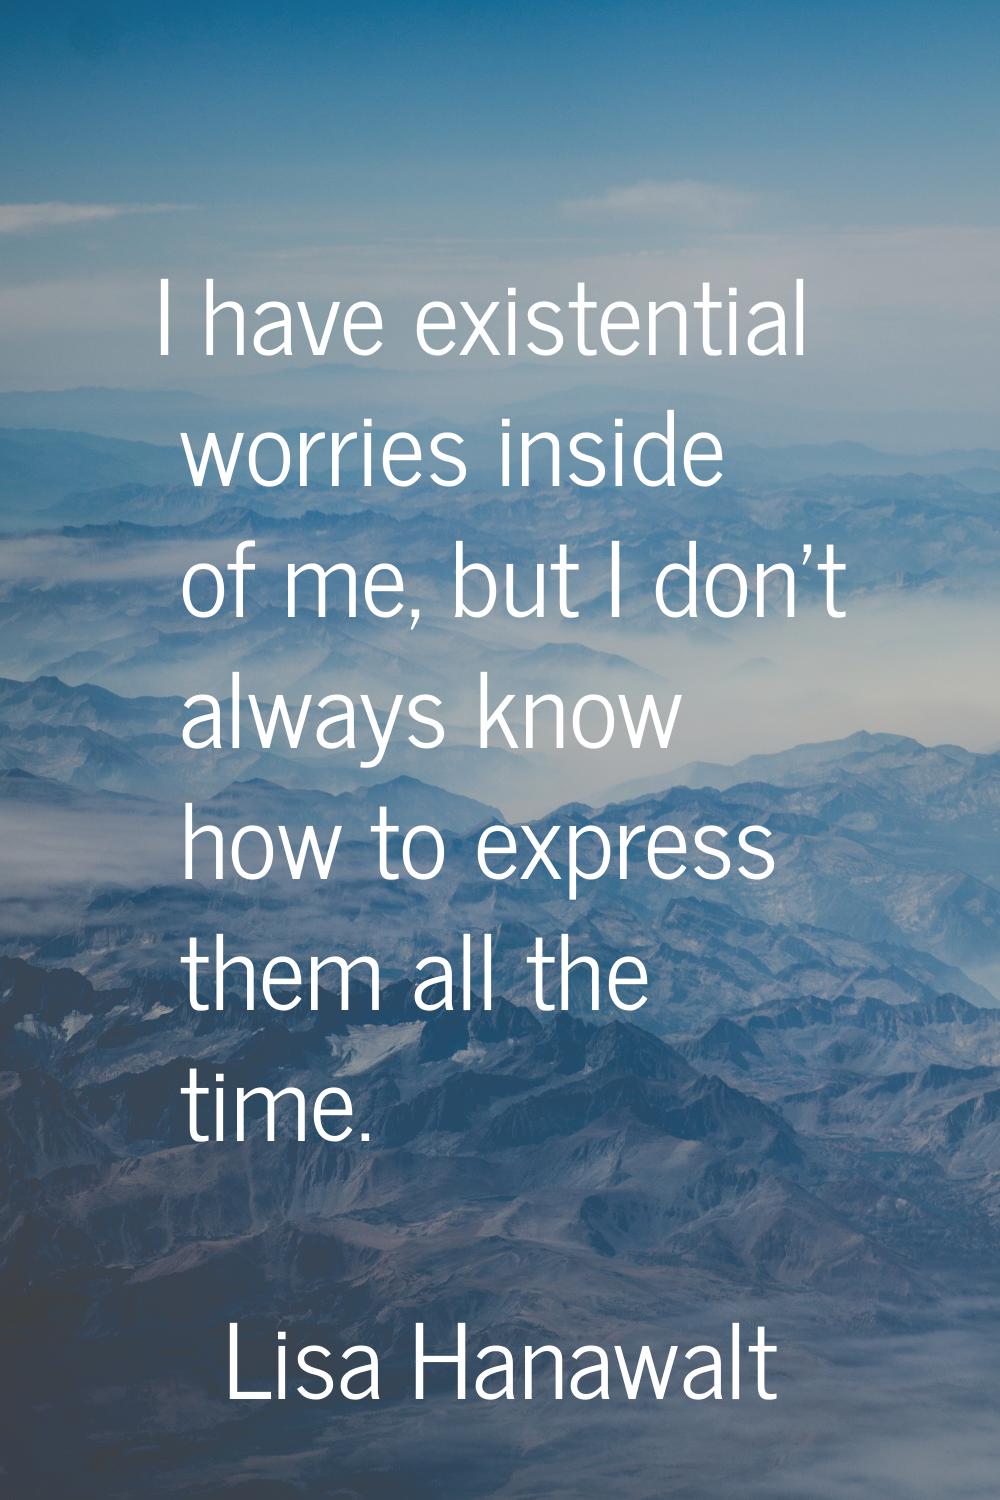 I have existential worries inside of me, but I don't always know how to express them all the time.